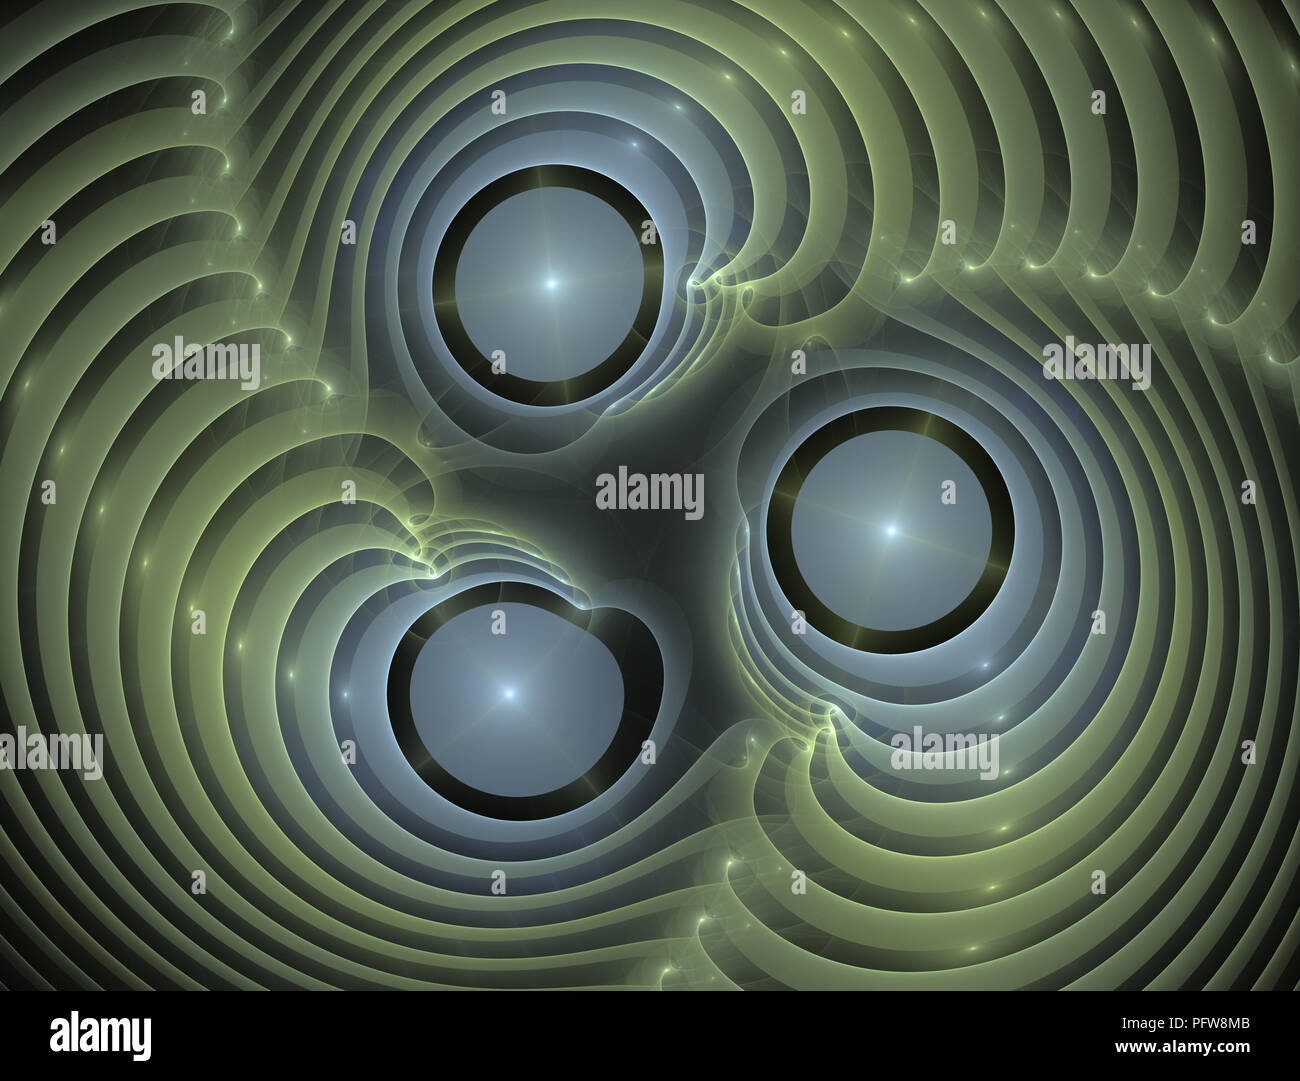 Elementary Particles series. Interplay of abstract fractal forms on the subject of nuclear physics. The collision of elementary particles. Interaction Stock Photo